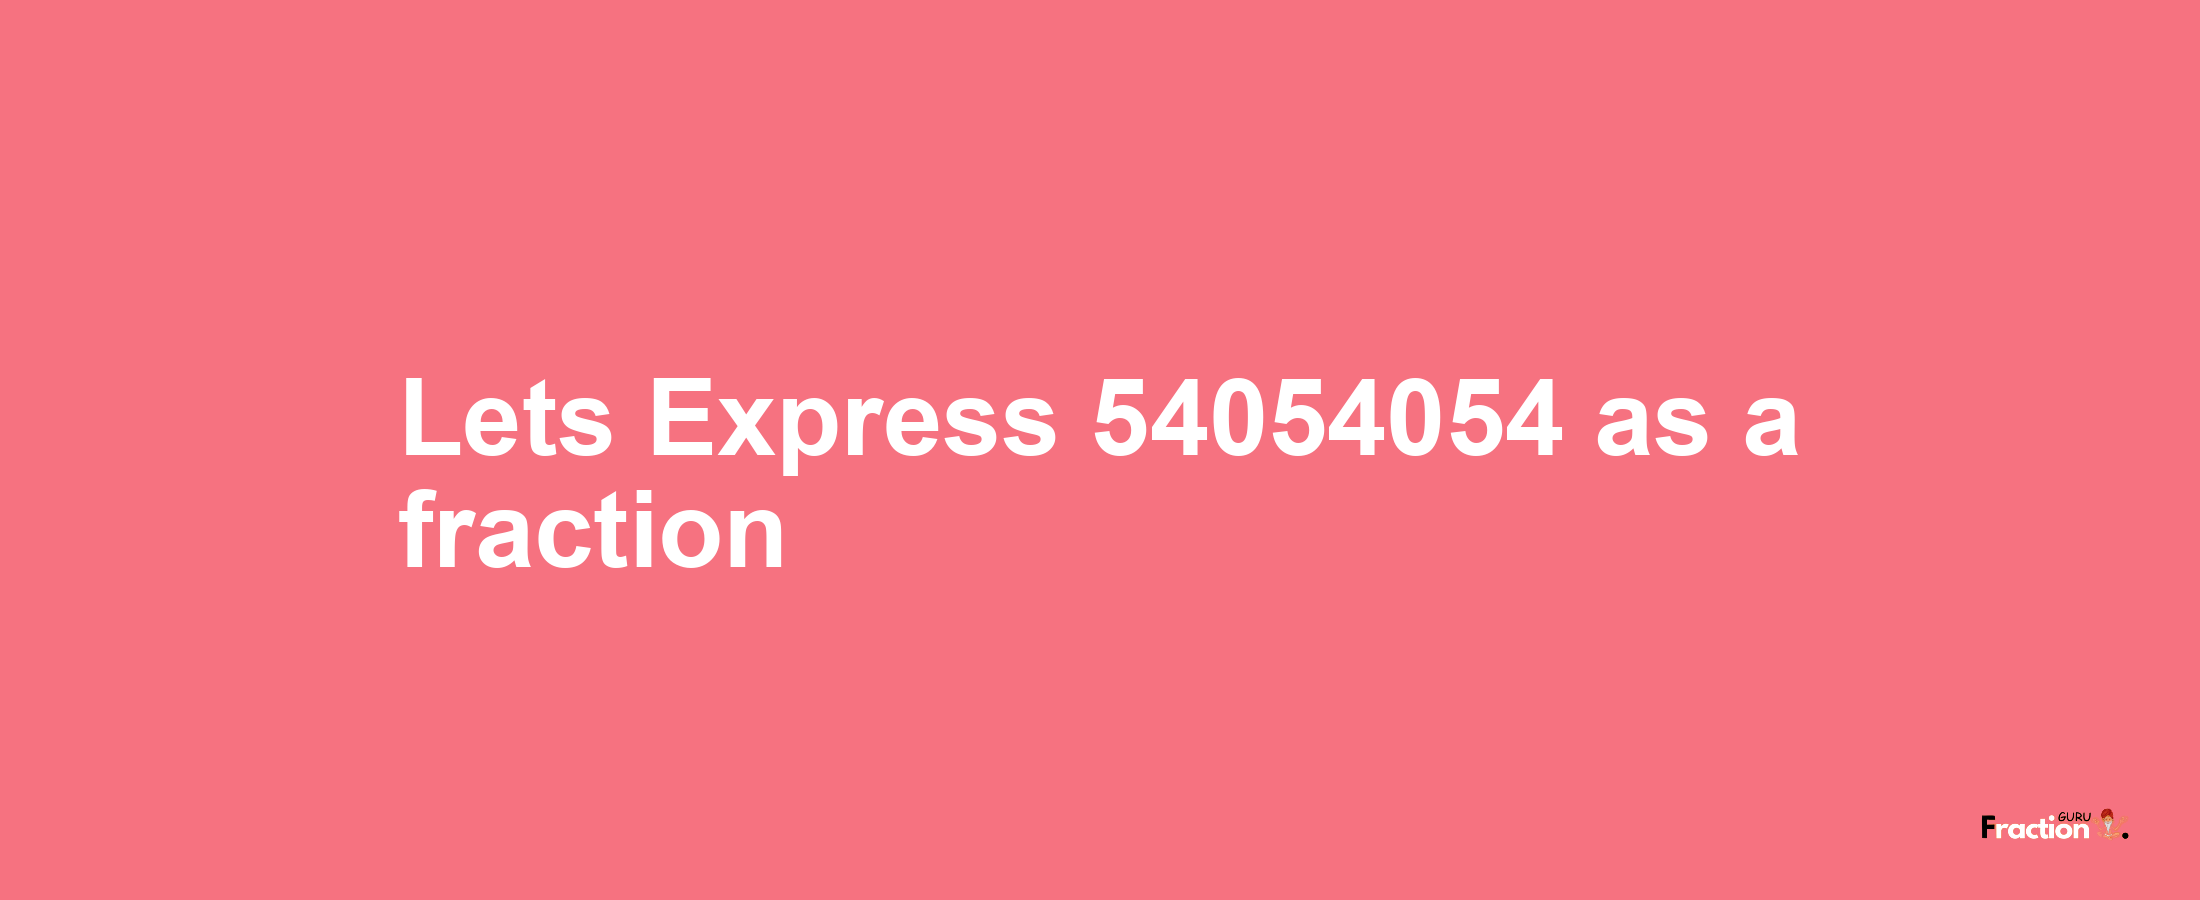 Lets Express 54054054 as afraction